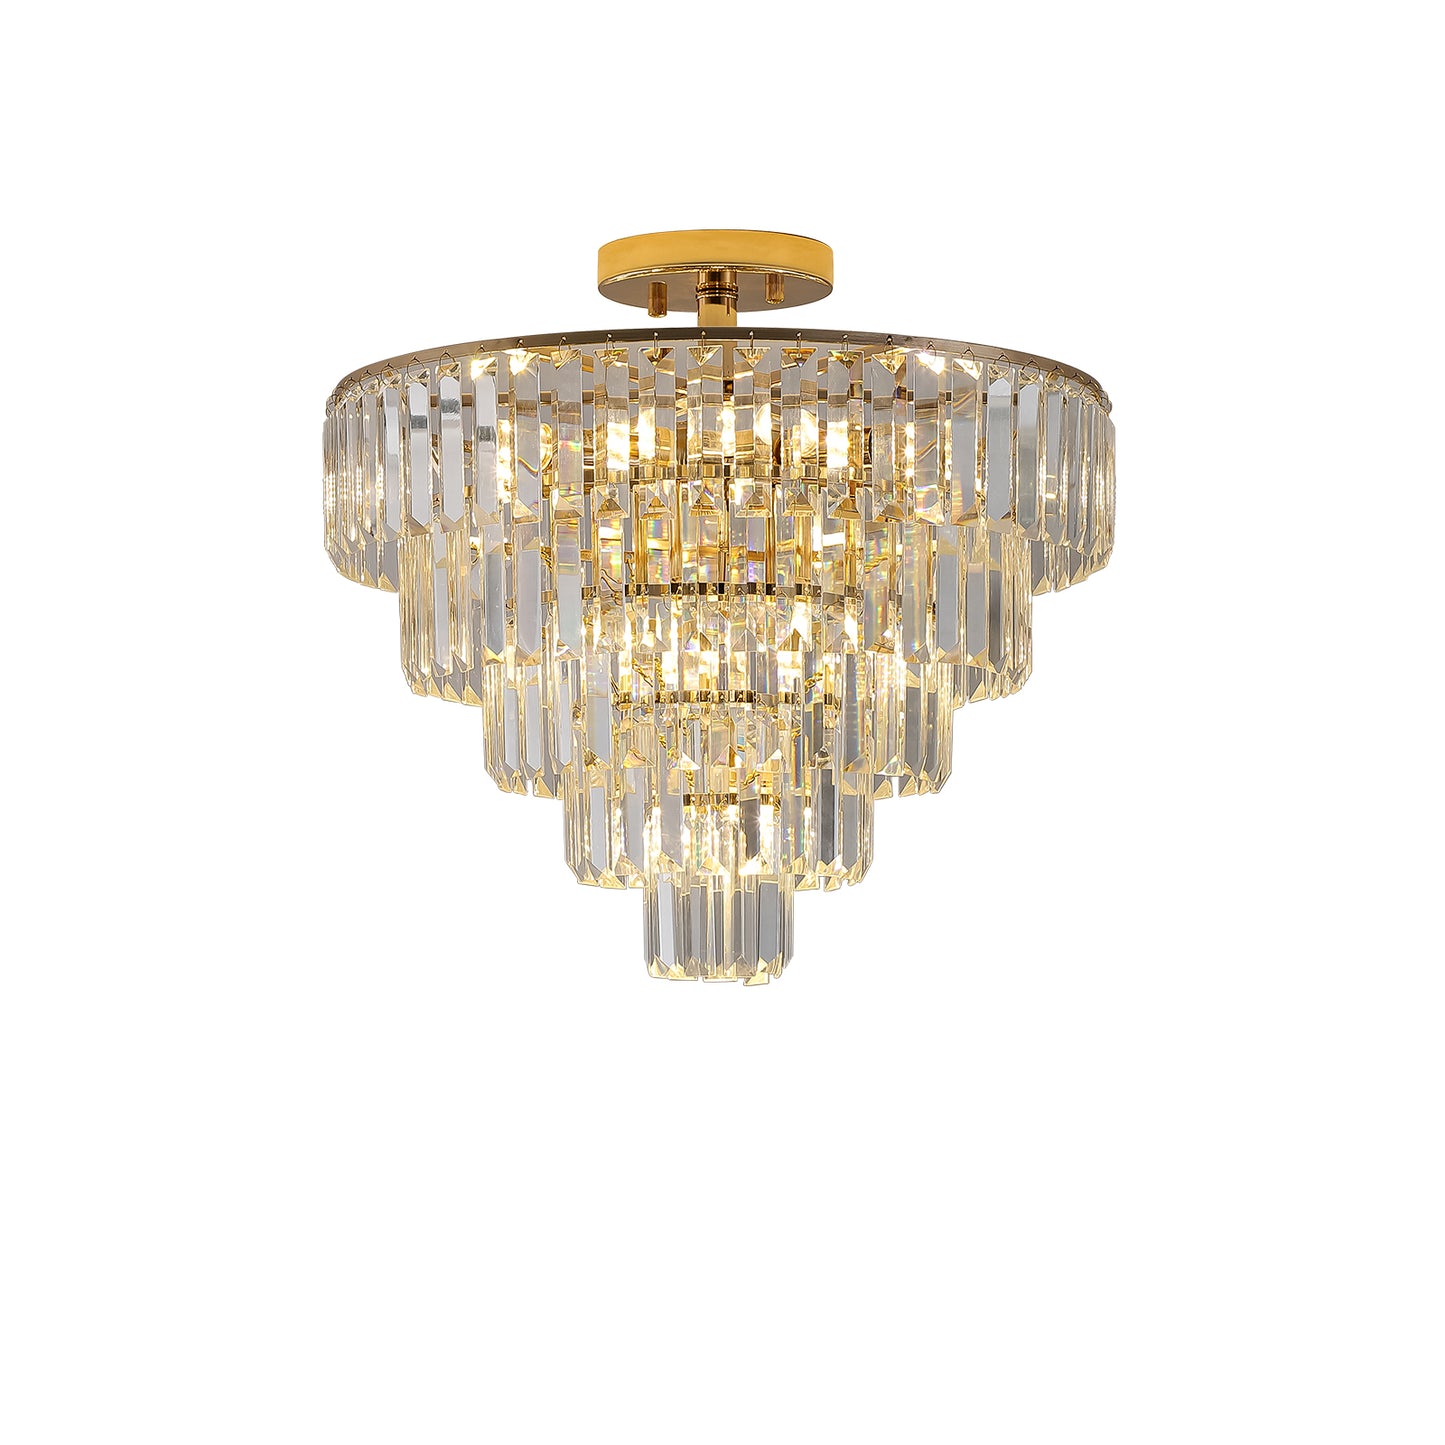 Gold Crystal Chandeliers,5-Tier Round Semi Flush Mount Chandelier Light Fixture,Large Contemporary Luxury Ceiling Lighting